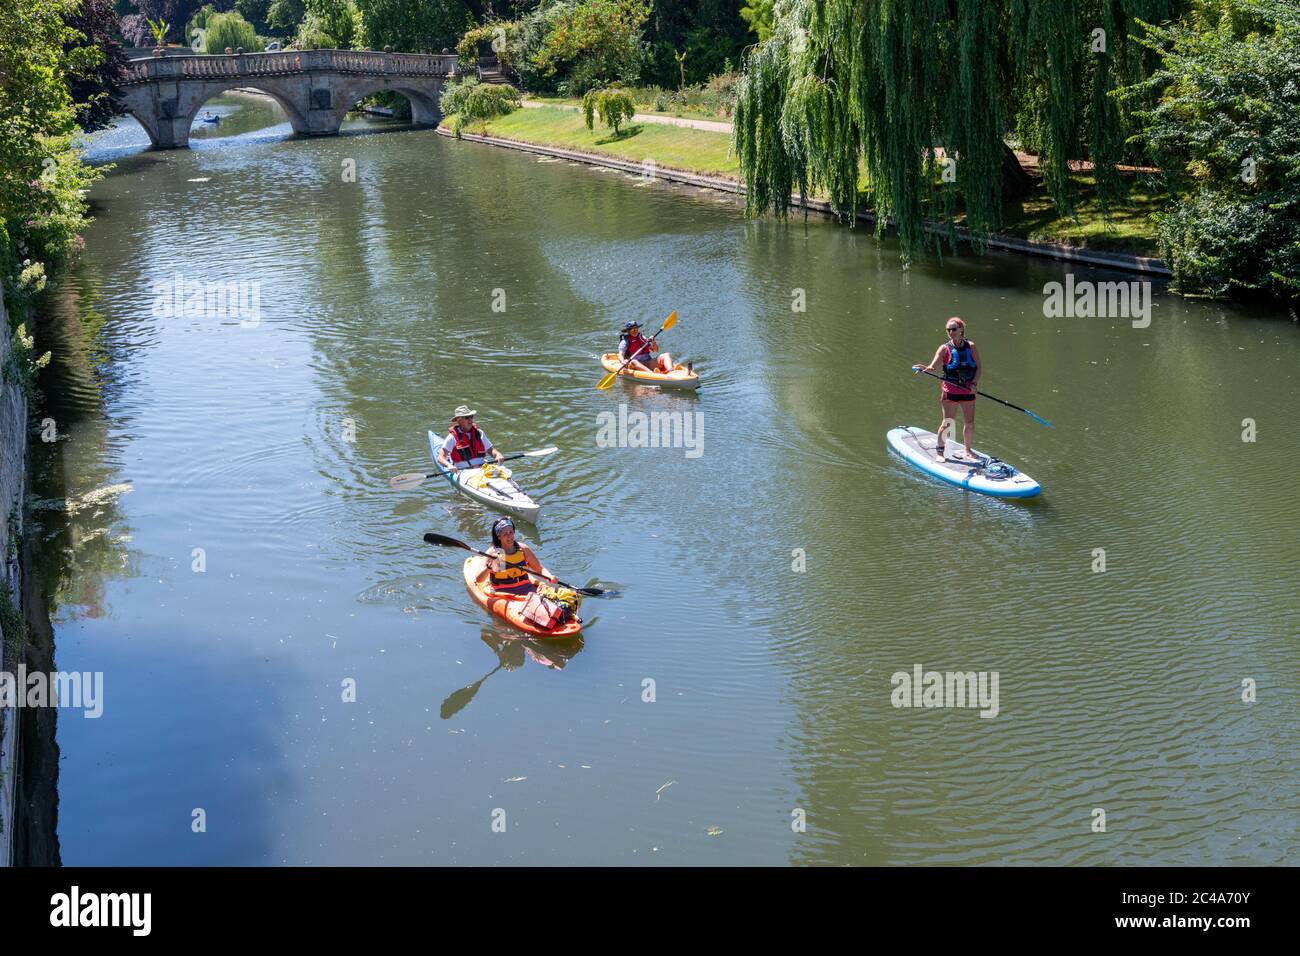 Cambridge, UK. 25th June, 2020. People enjoy the heatwave on the River Cam as temperatures rise above 30 degrees centigrade. The river is very quiet due to the shutting of most punting companies during the coronavirus lockdown. There are also warnings of high ultraviolet violet rays in the less polluted summer weather. Credit: Julian Eales/Alamy Live News Stock Photo